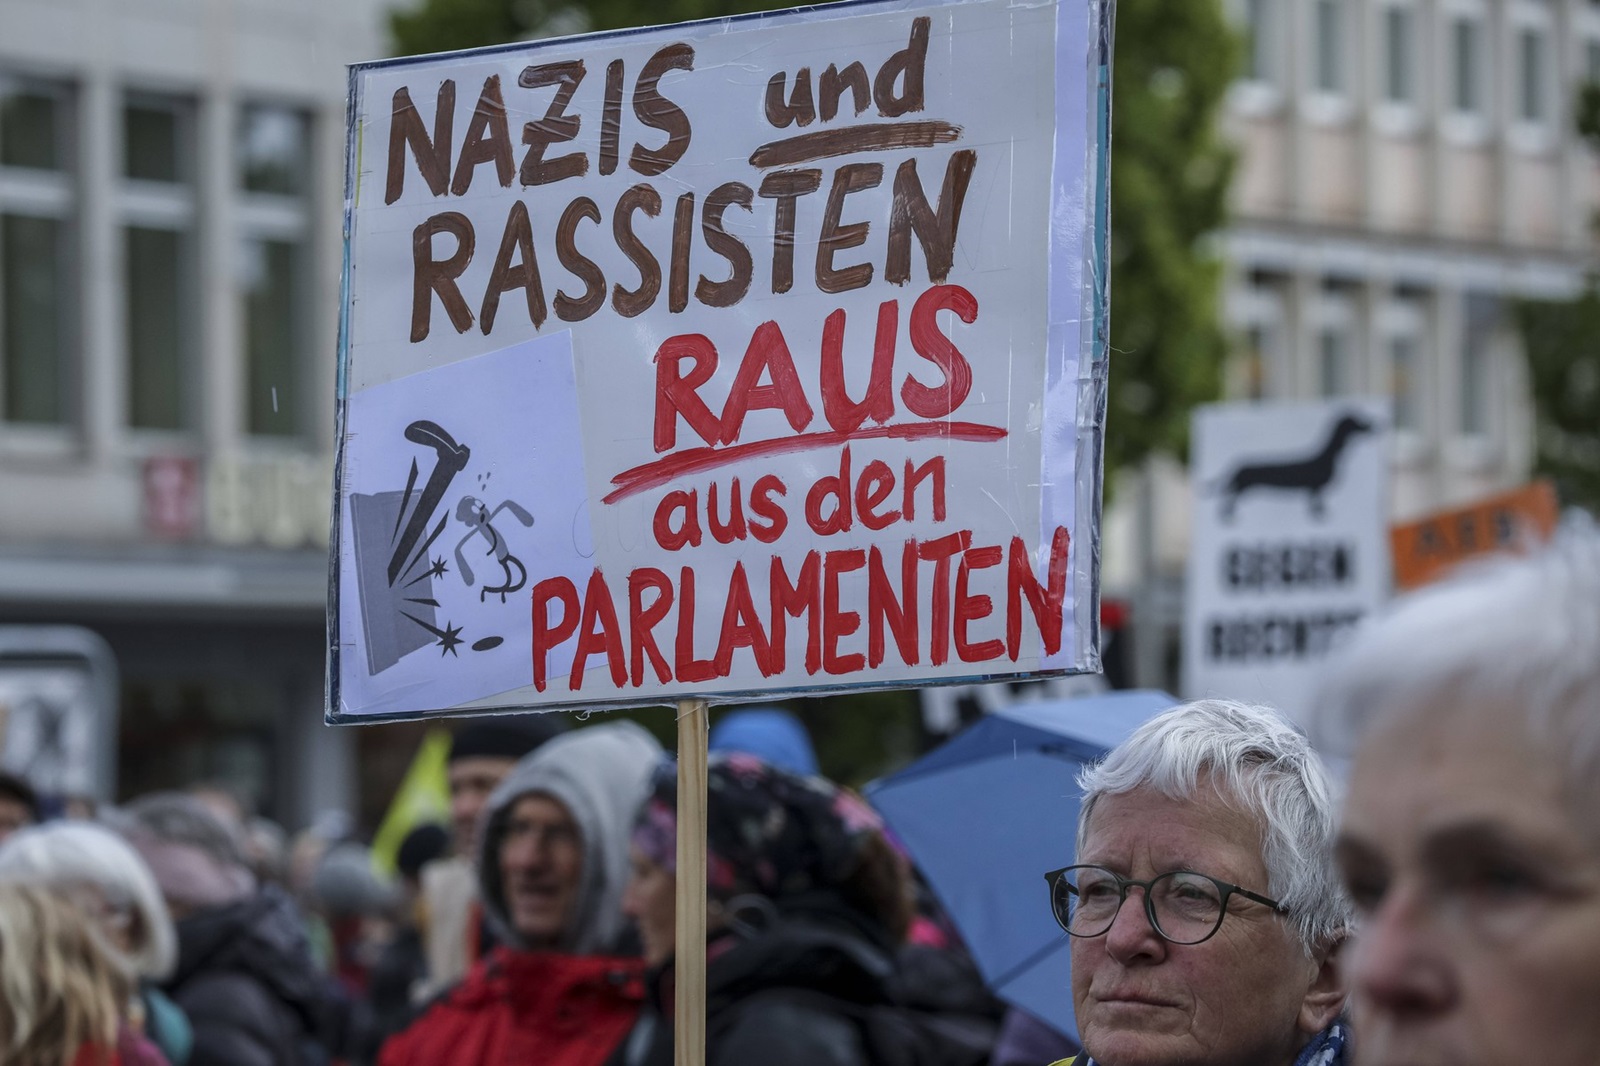 20.04.2024, Demonstration für AfD-Verbot, Nürnberg: Am Nachmittag gingen rund 300 Personen auf die Straße um gegen die rechtsextreme Partei Alternative für Deutschland AfD zu protestieren und zugeleich ein Verbotsverfahren gegen jene Partei zu fordern. Am Rande demonstrierten ca. 20 Personen für die Rechtsextremen. Bayern Deutschland Demonstration für AfD-Verbot-20 *** 20 04 2024, Demonstration for AfD ban, Nuremberg In the afternoon, around 300 people took to the streets to protest against the far-right party Alternative for Germany AfD and at the same time to call for a ban on the party On the sidelines, around 20 people demonstrated in support of the far-right Bavaria Germany Demonstration for AfD ban 20,Image: 866496373, License: Rights-managed, Restrictions: imago is entitled to issue a simple usage license at the time of provision. Personality and trademark rights as well as copyright laws regarding art-works shown must be observed. Commercial use at your own risk., Credit images as "Profimedia/ IMAGO", Model Release: no, Credit line: IMAGO / imago stock&people / Profimedia